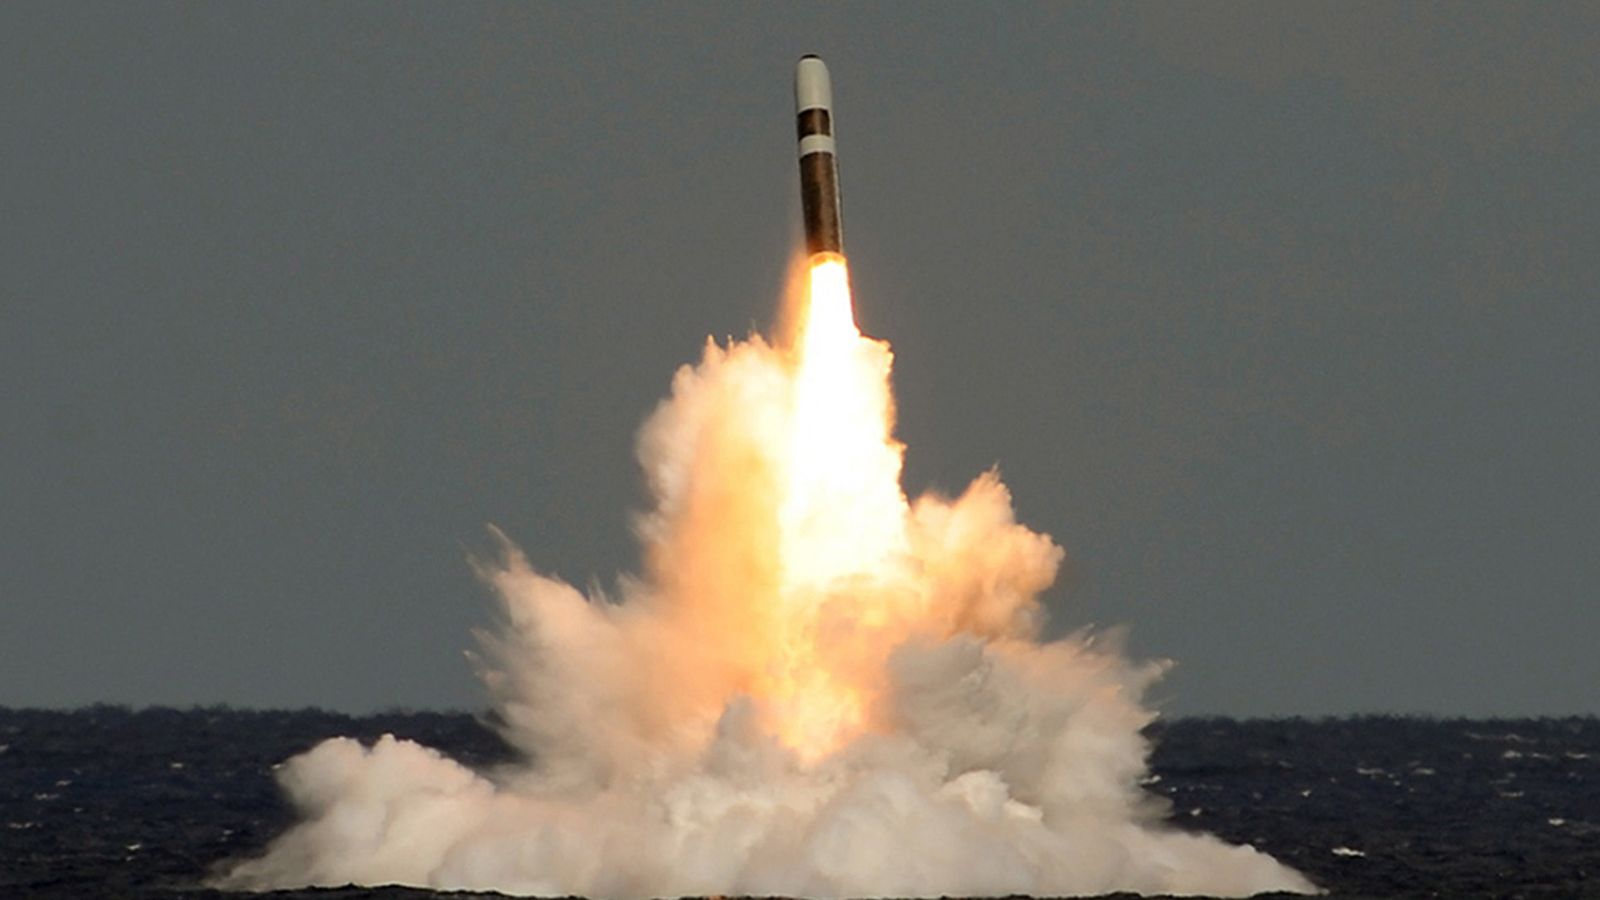 trident missile misfired and crashed into ocean during test launch